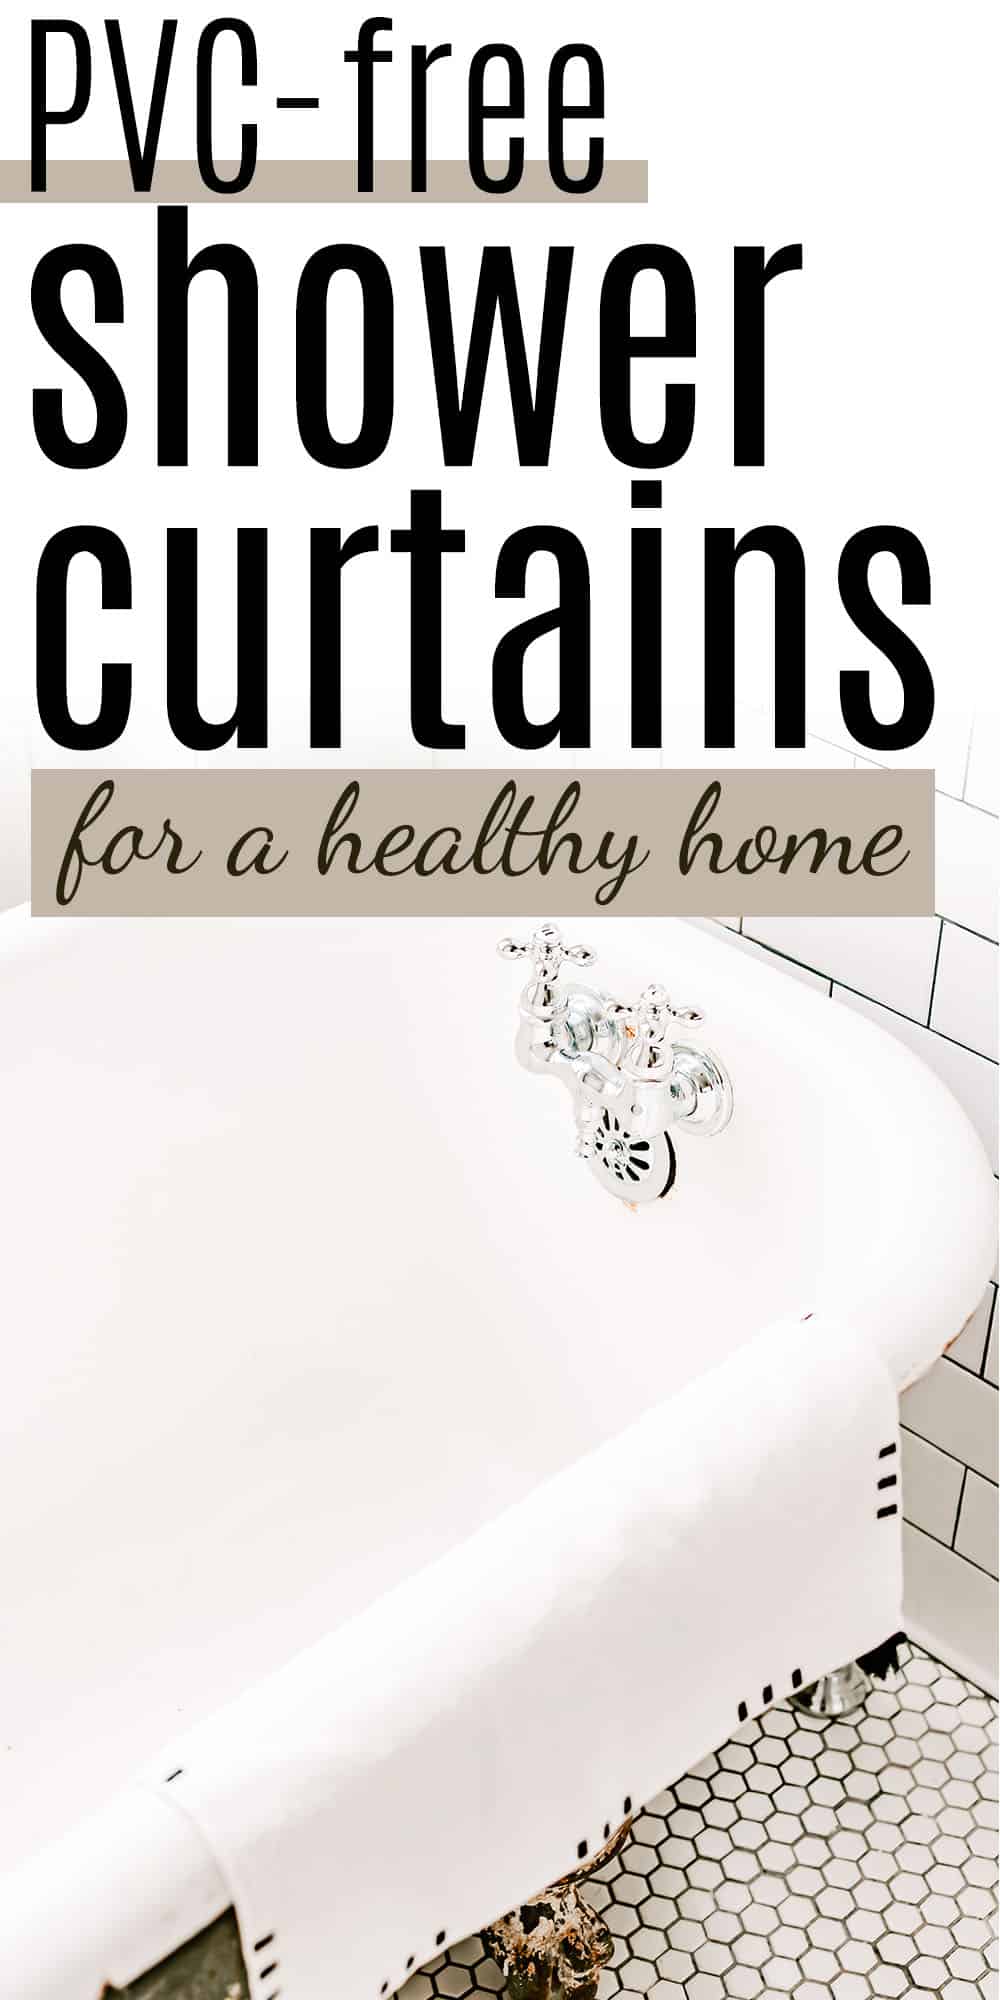 Why You Need A Nontoxic Shower Curtain, Non Toxic Clear Shower Curtain